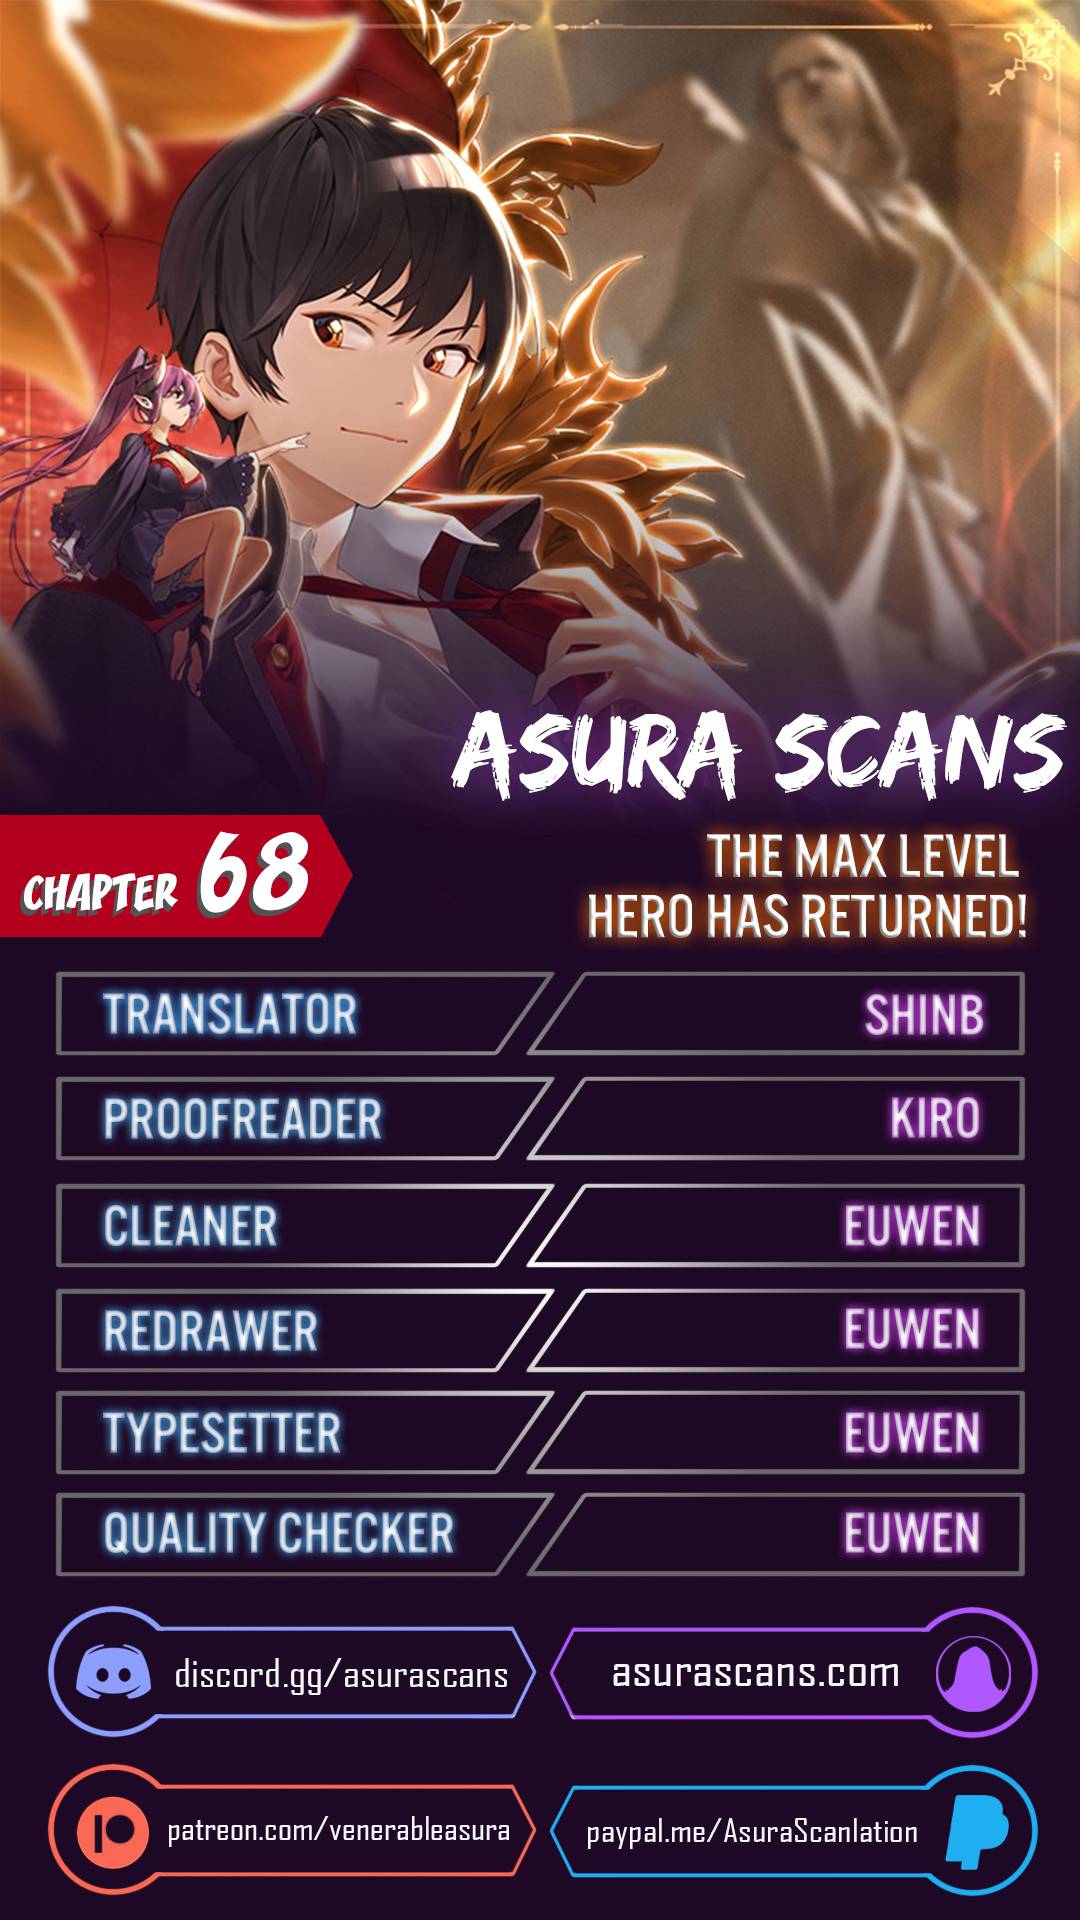 The MAX leveled hero will return! Chapter 68